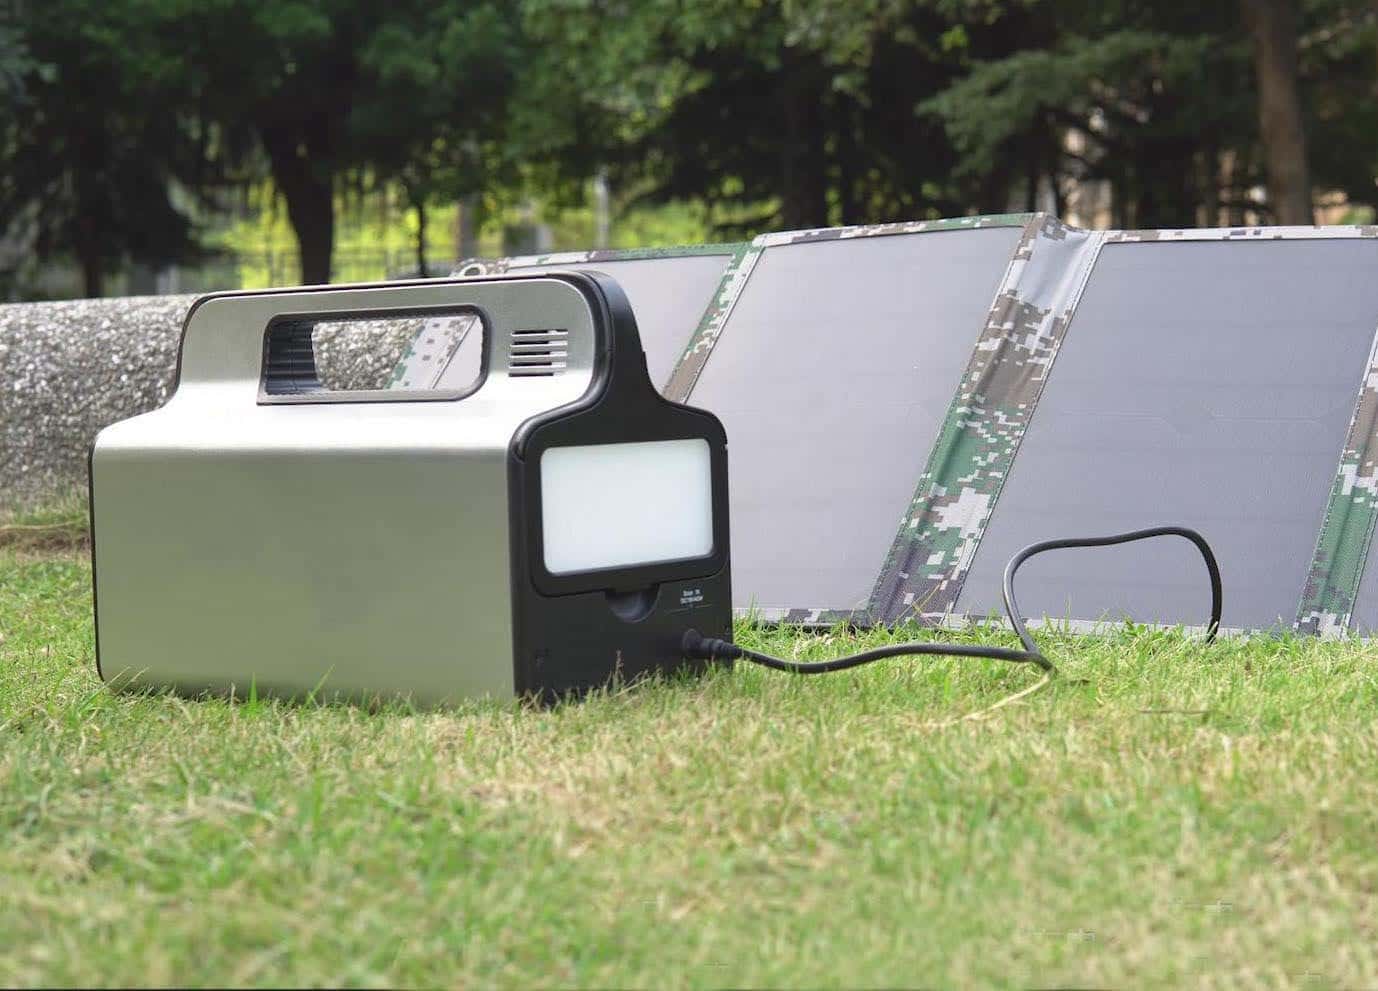 solar panel for camper connected to a solar panel generator installed outdoors